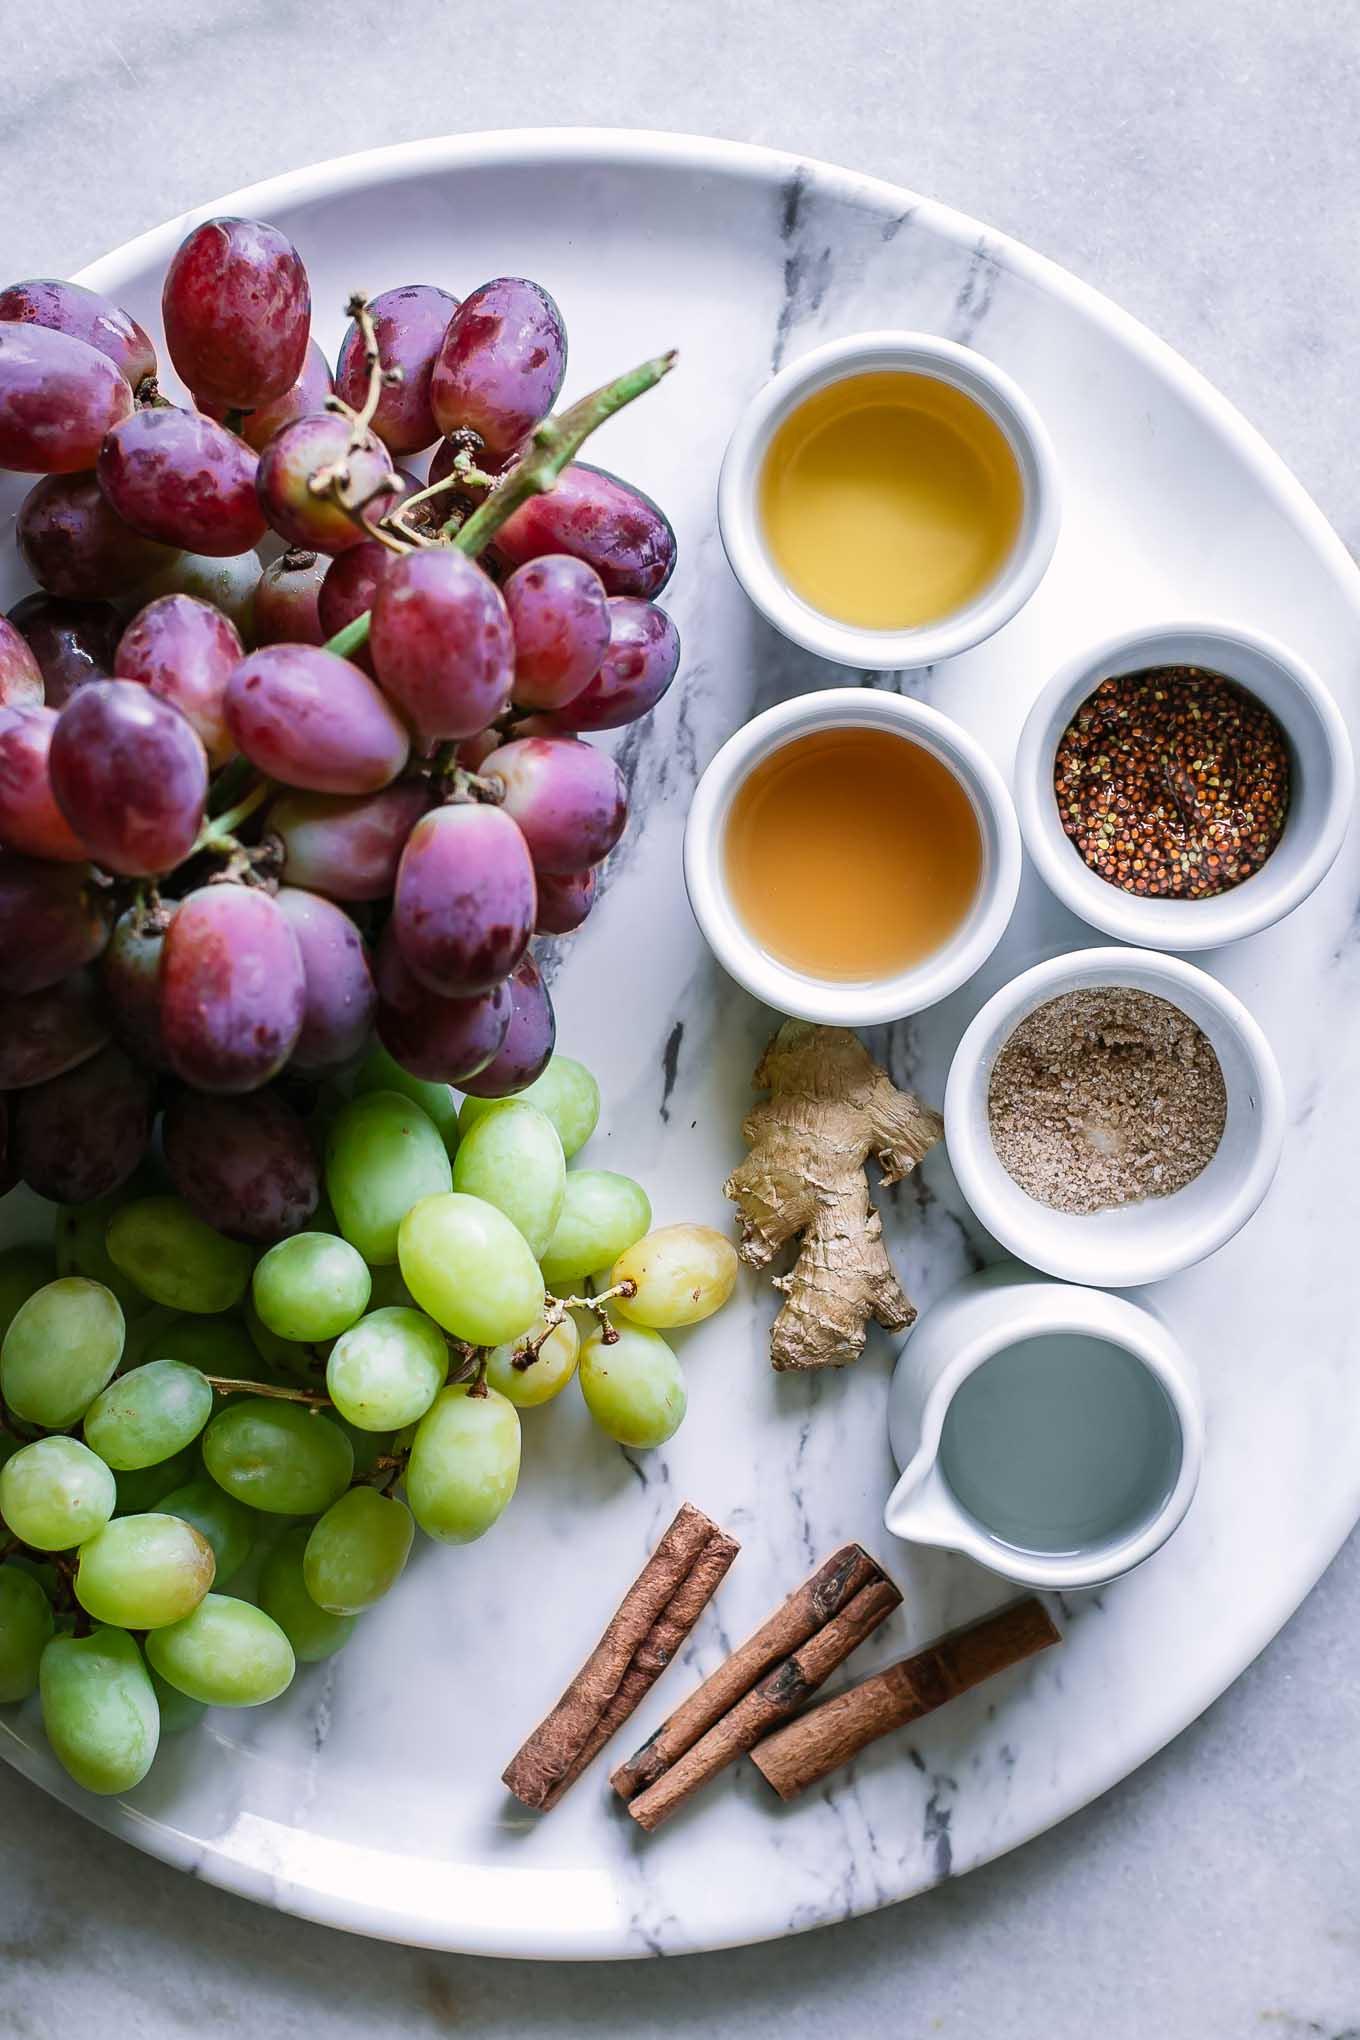 red and green grapes, cinnamon sticks, ginger root, and bowls of water, vinegar, mustard seeds, sugar, and salt on a white table